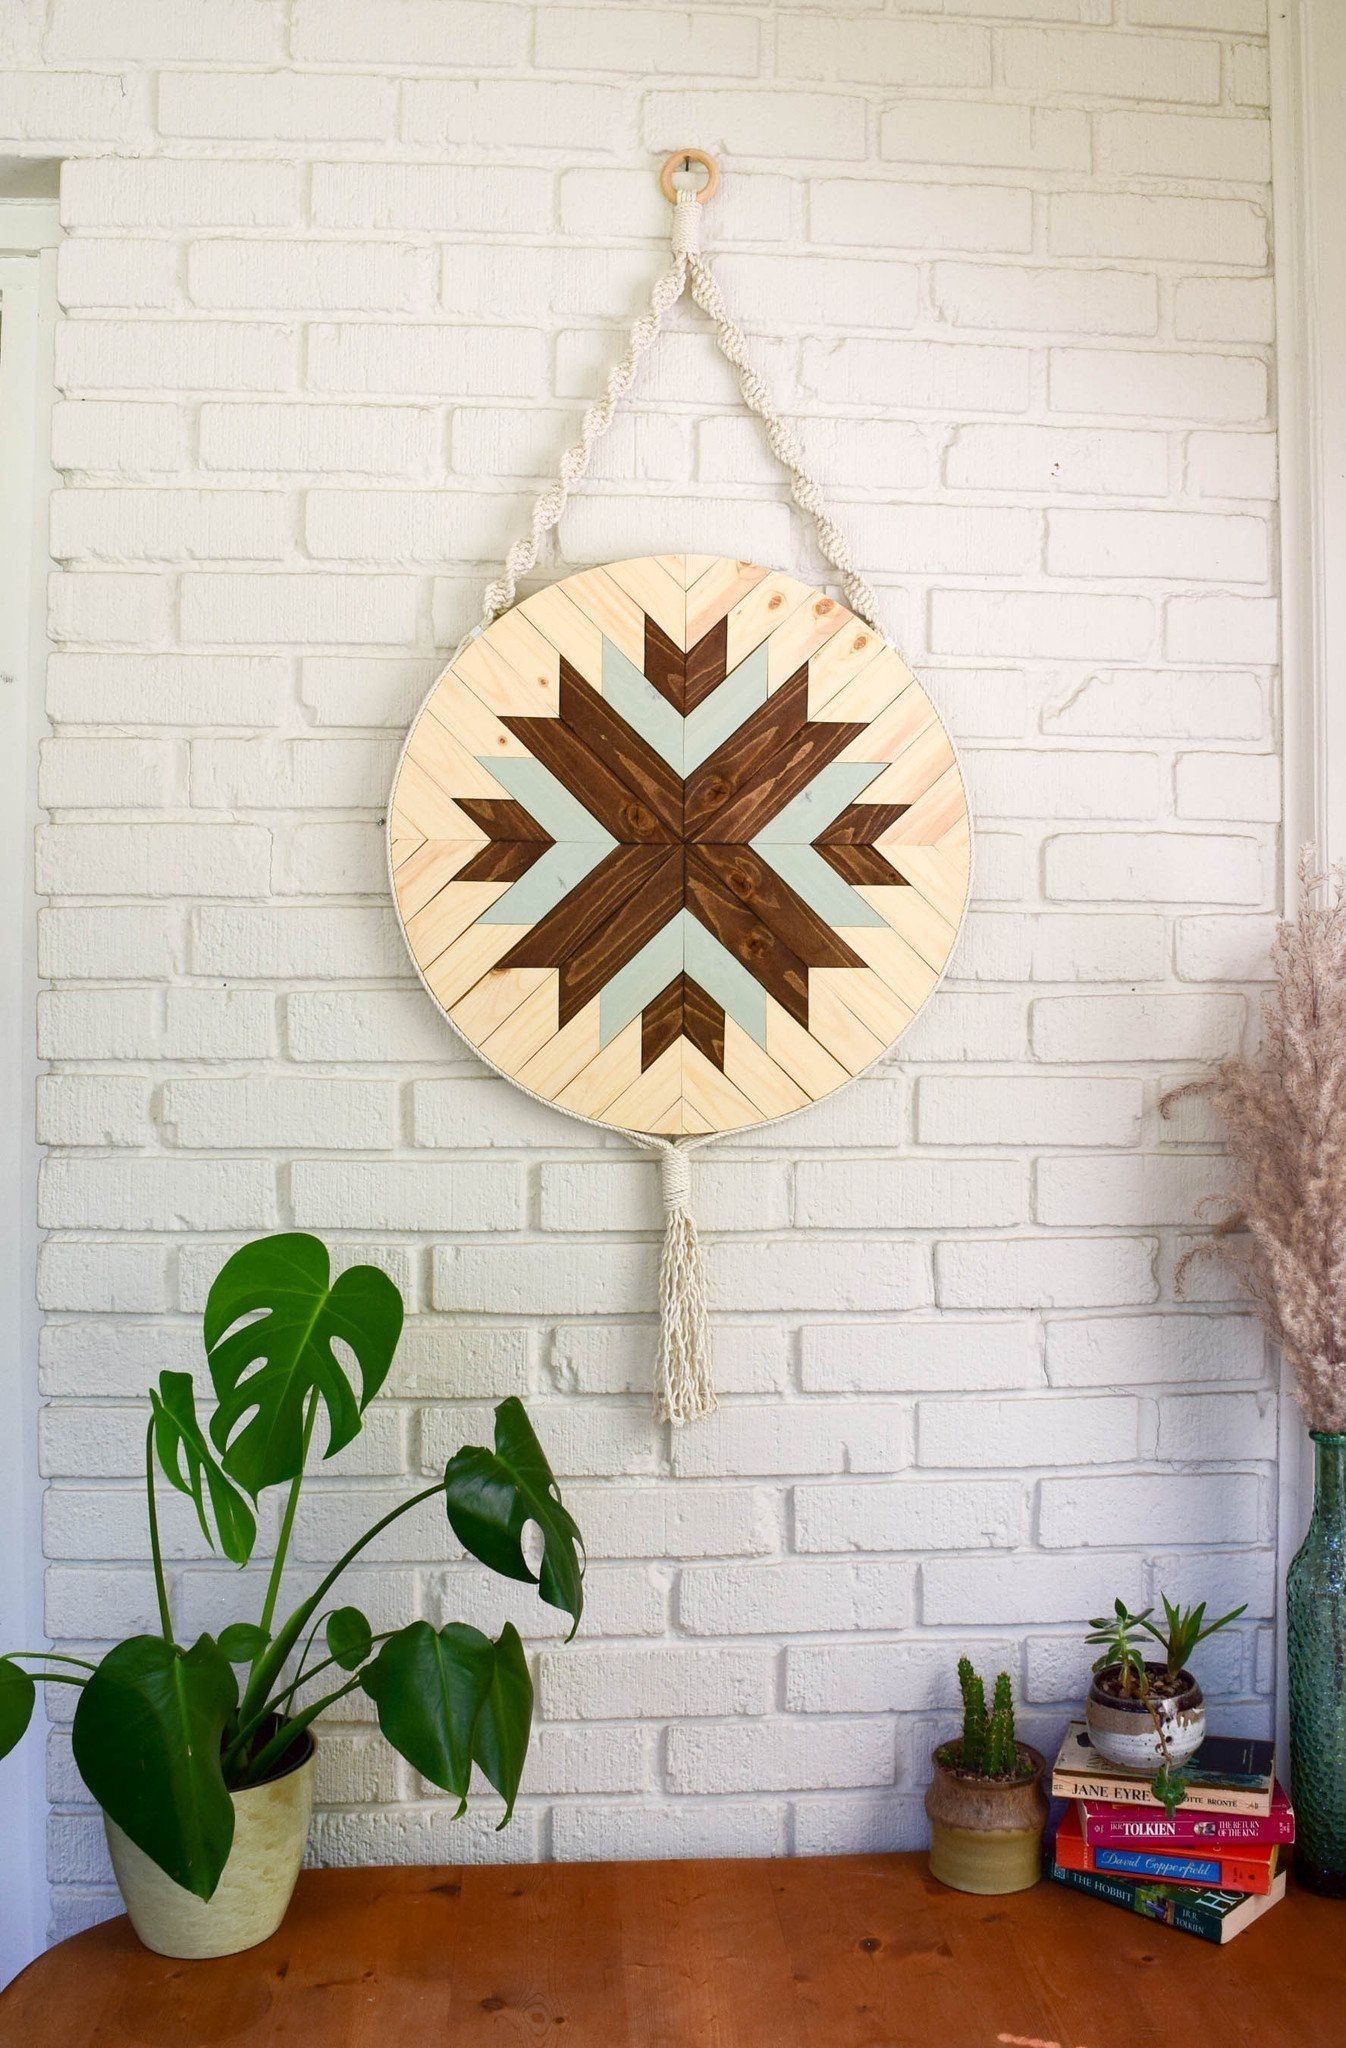 Labyrinth – Round Macrame Wood Wall Art Hanging | Ideas For The Within Round Wood Wall Art (View 8 of 20)